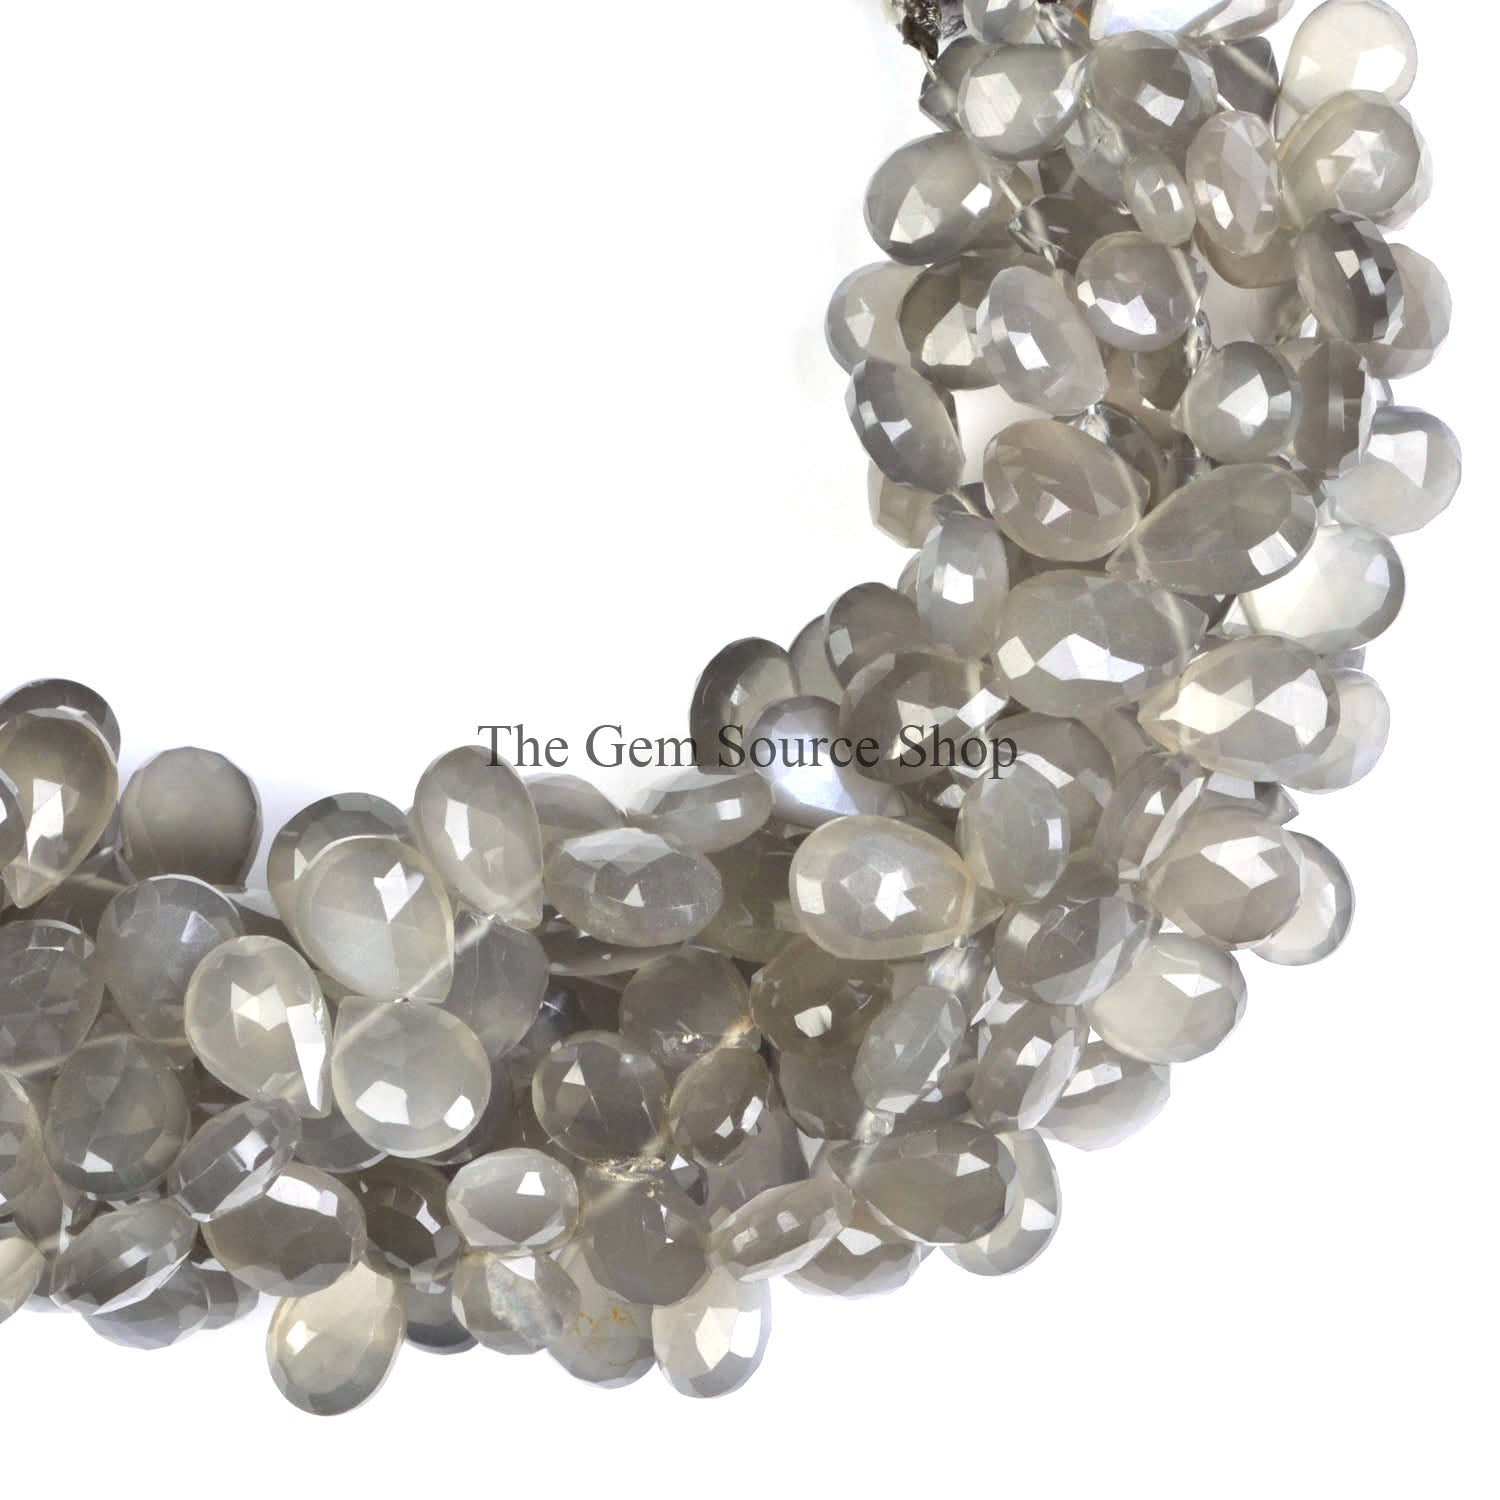 Grey Moonstone Beads, Moonstone Faceted Beads, Moonstone Pear Shape Beads, Wholesale Beads